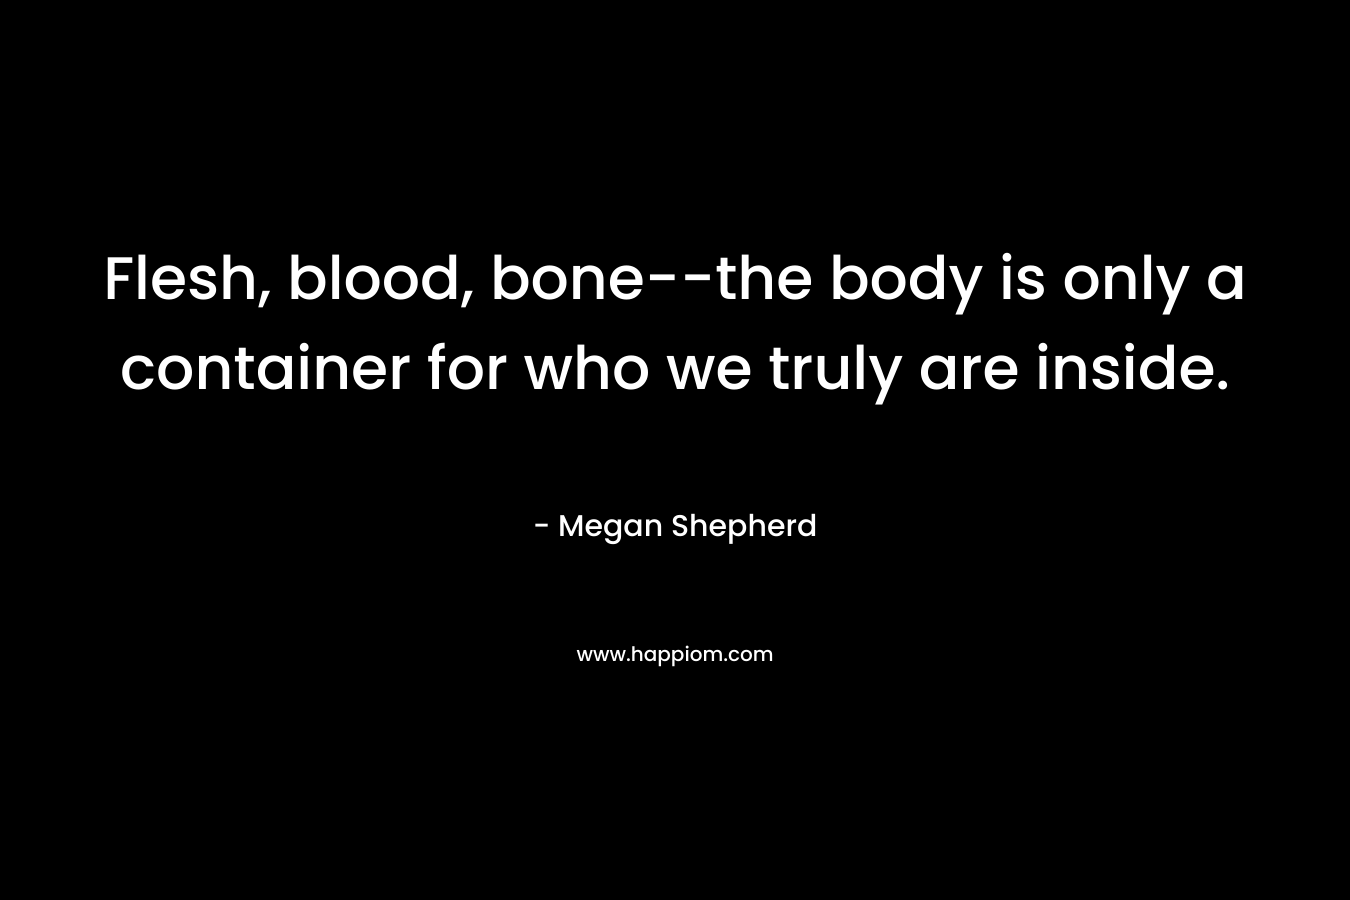 Flesh, blood, bone–the body is only a container for who we truly are inside. – Megan Shepherd